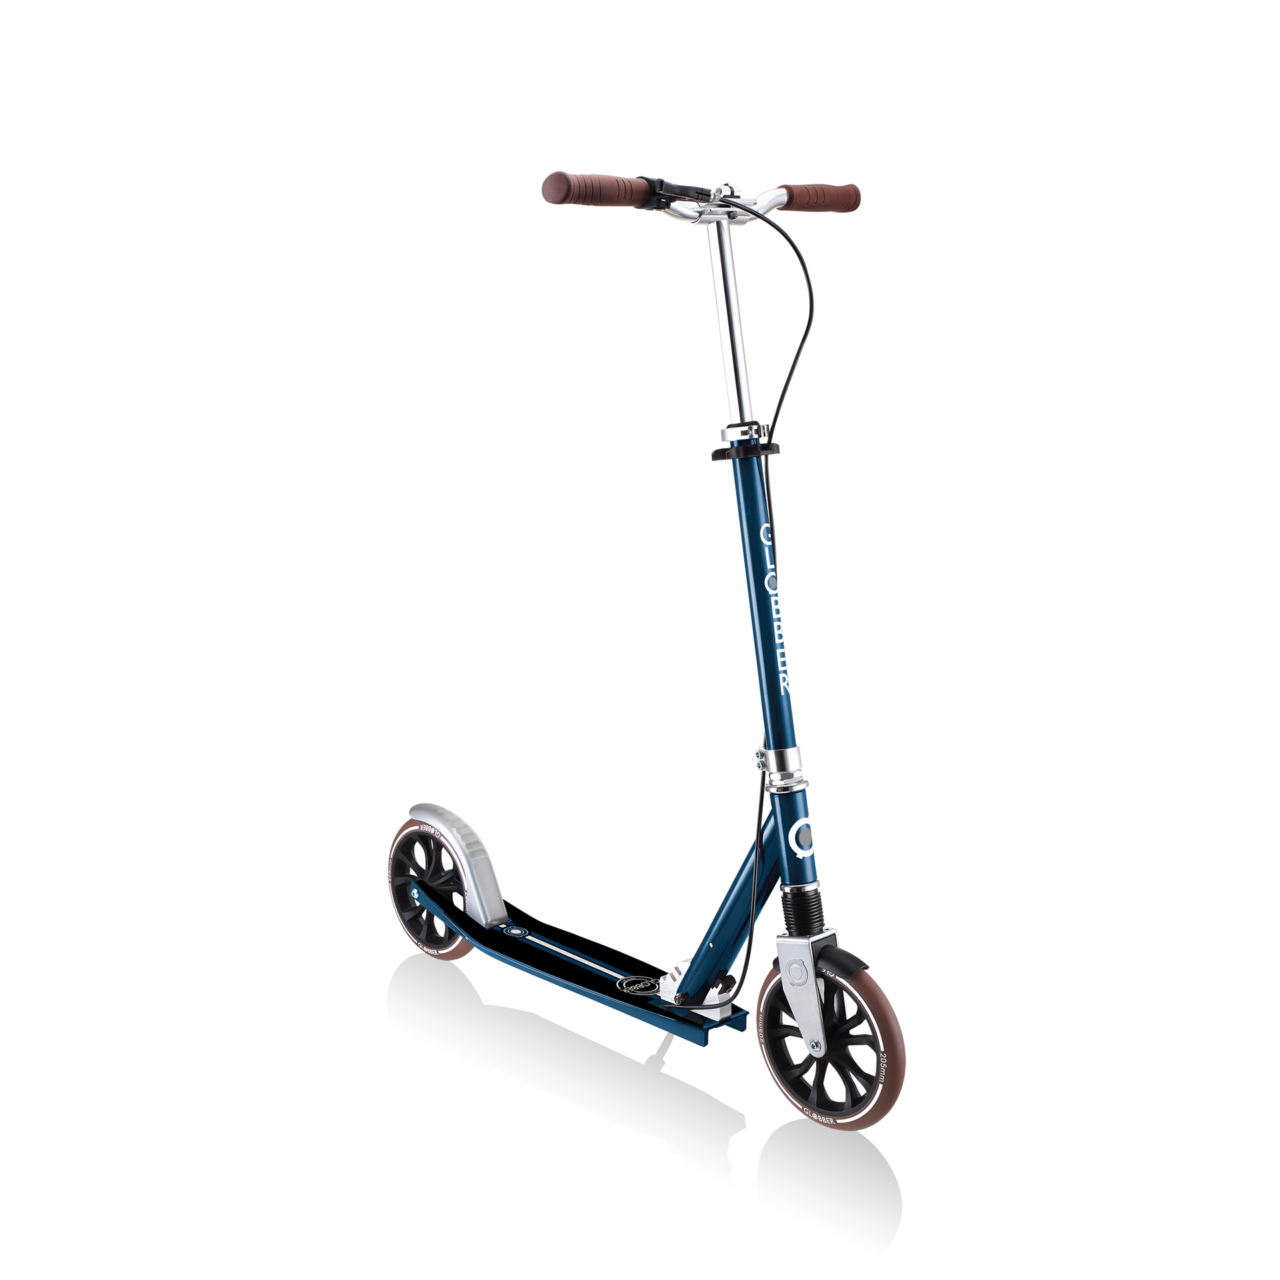 685 100 Big Wheel Scooter For Kids And Teens